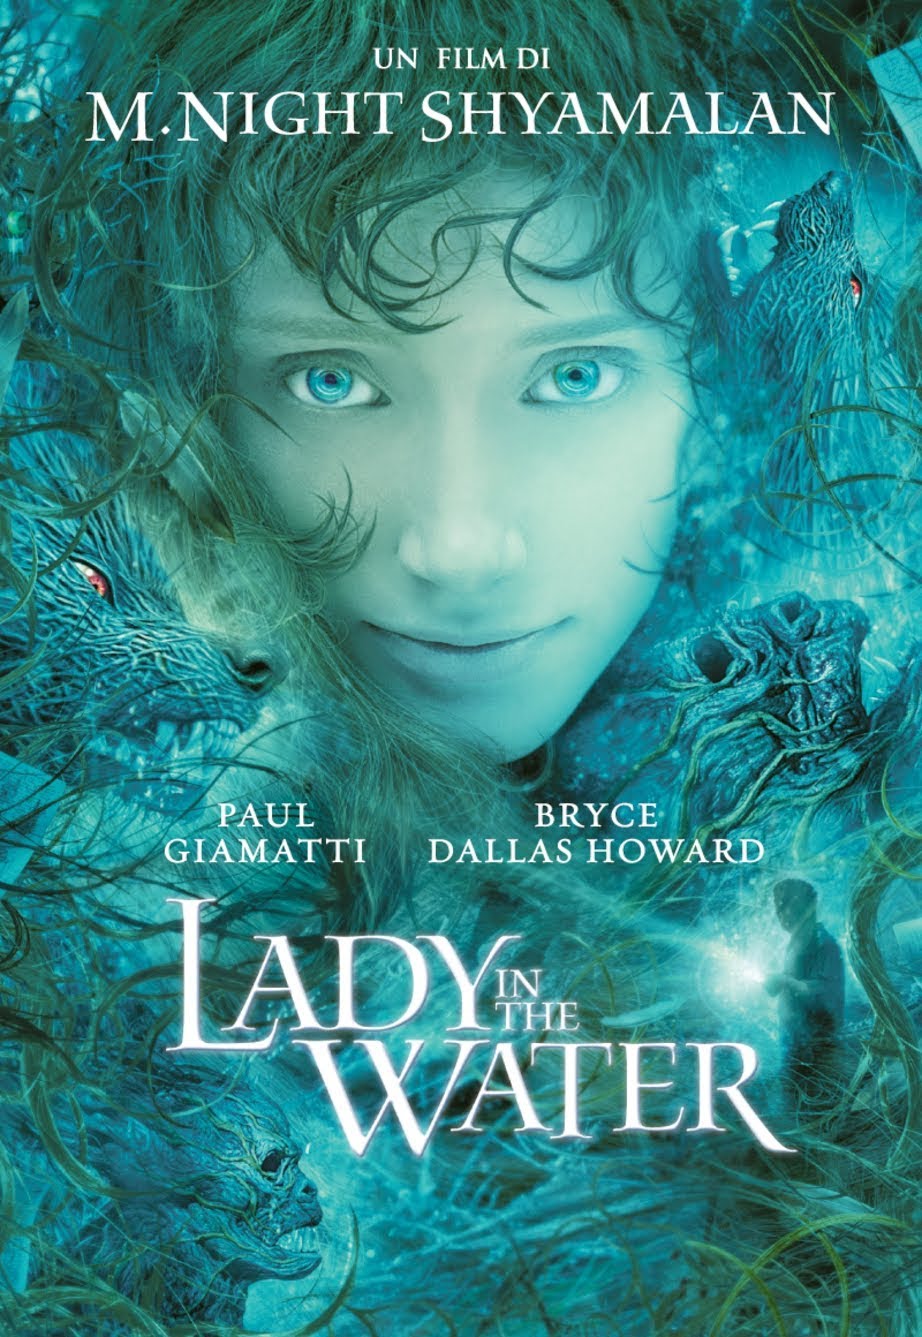 Lady in the Water [HD] (2006)